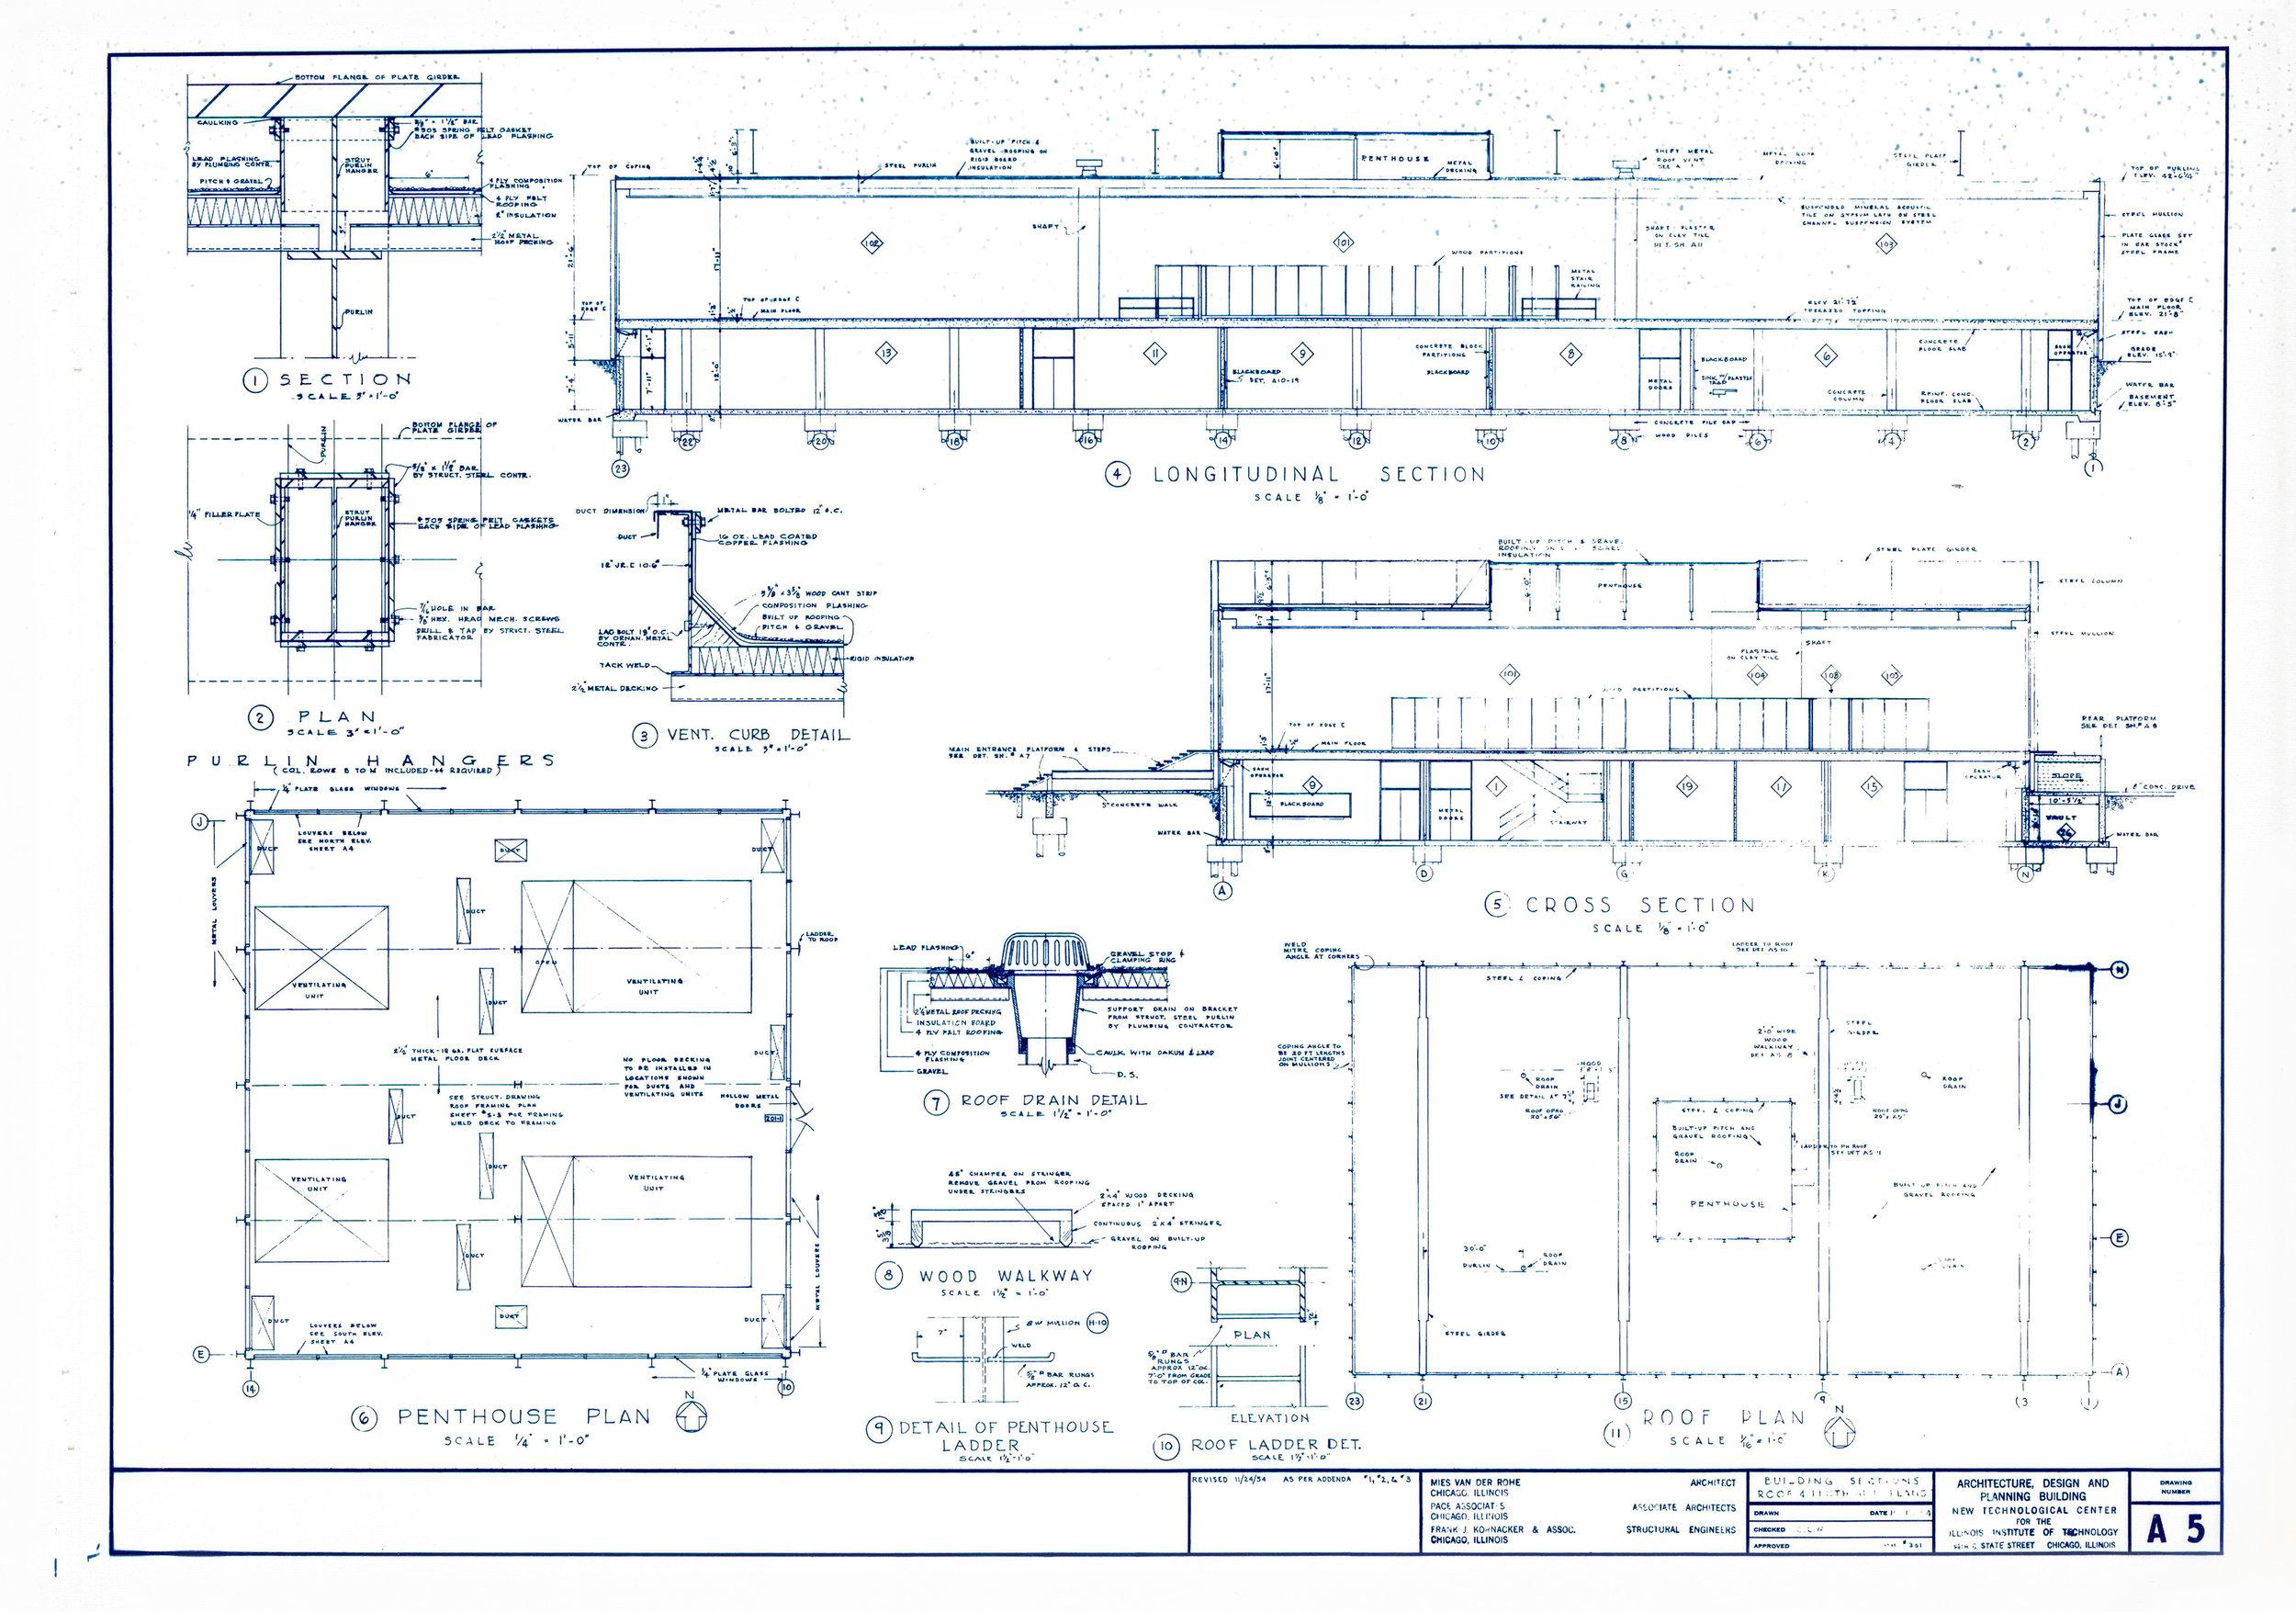 Mies van der Rohe Blueprint, One Charles Center, Baltimore 1961, Elevations  2